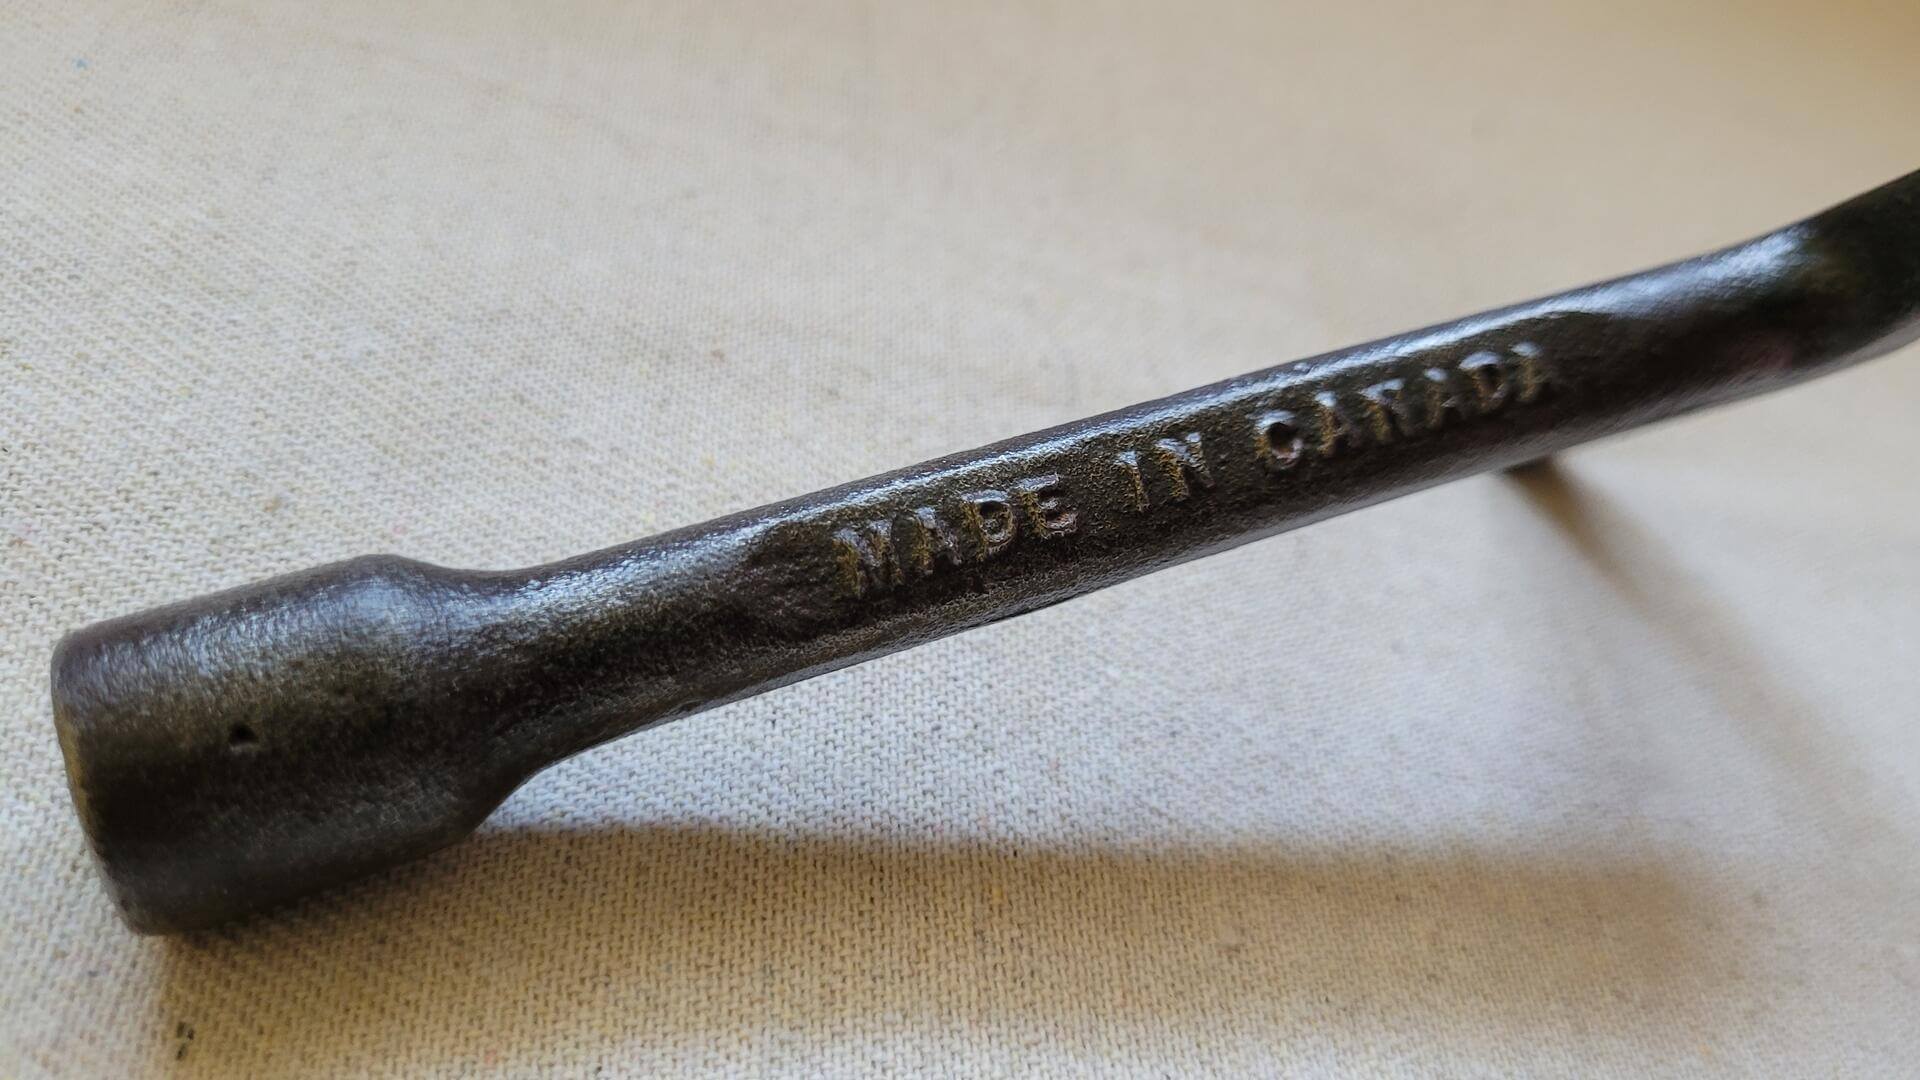 Vintage T Handle Prest-o-Lite Tank Valve Wrench Made in Canada - Antique collectible mechanic and welding hand tools